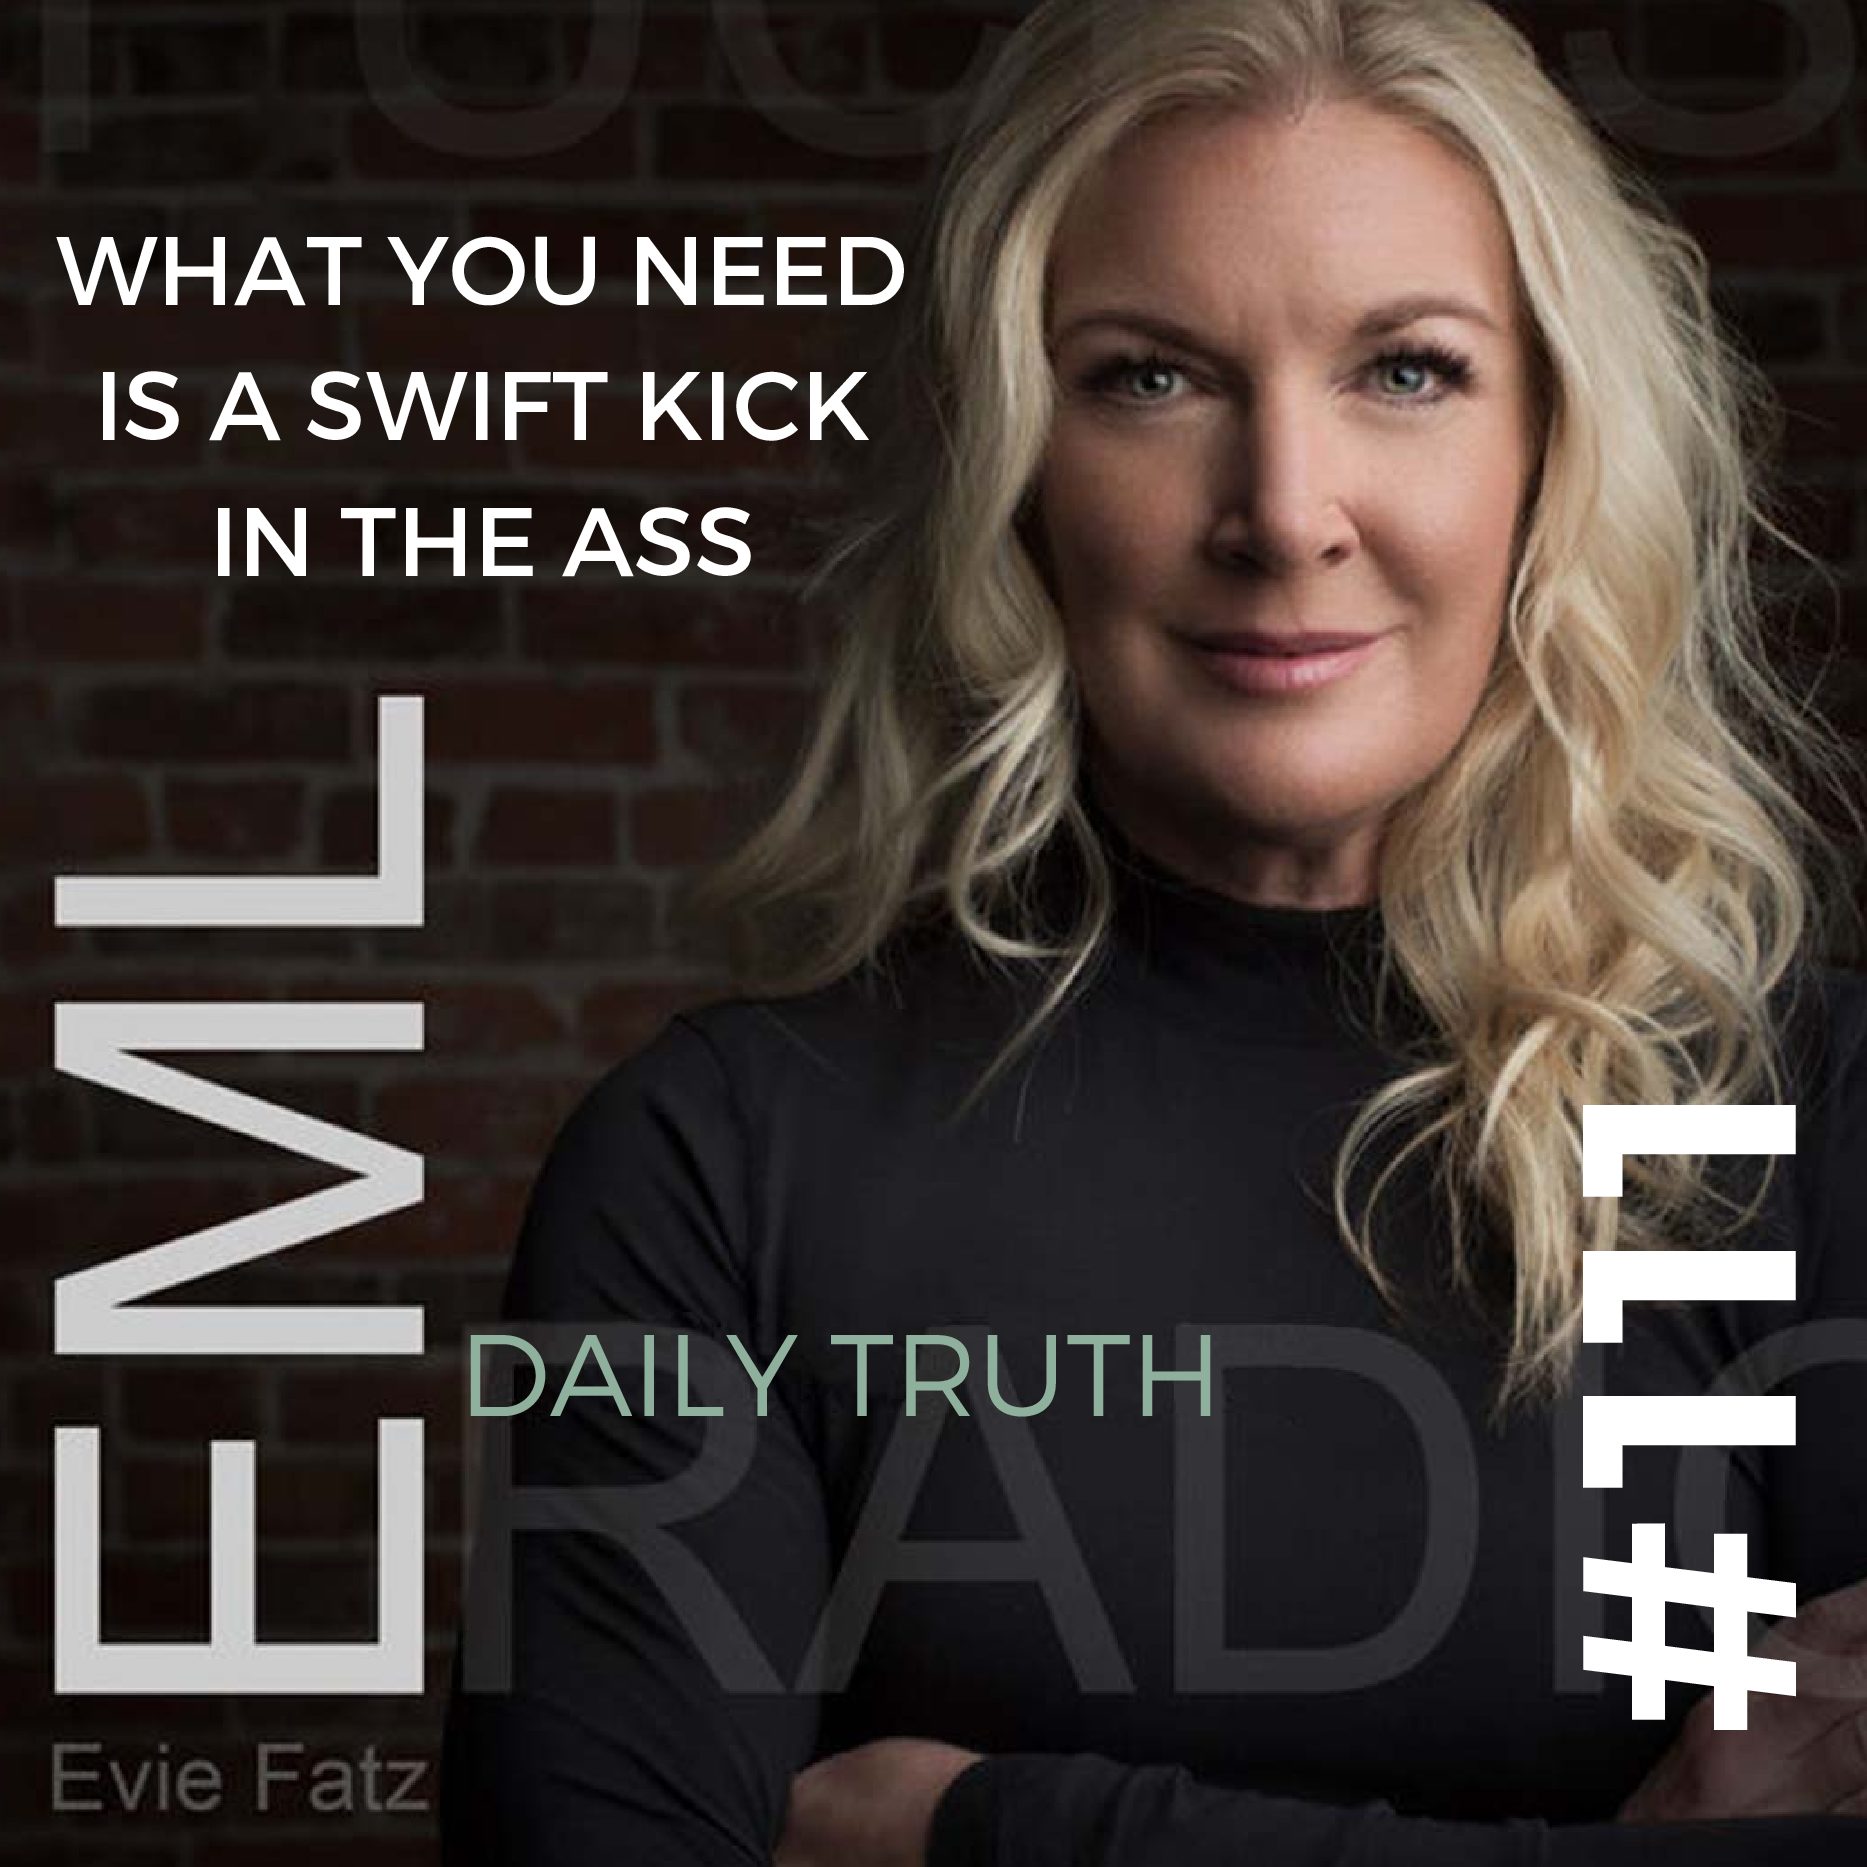 EP #111 – Daily Truth: What You Need Is a Swift Kick in the Ass